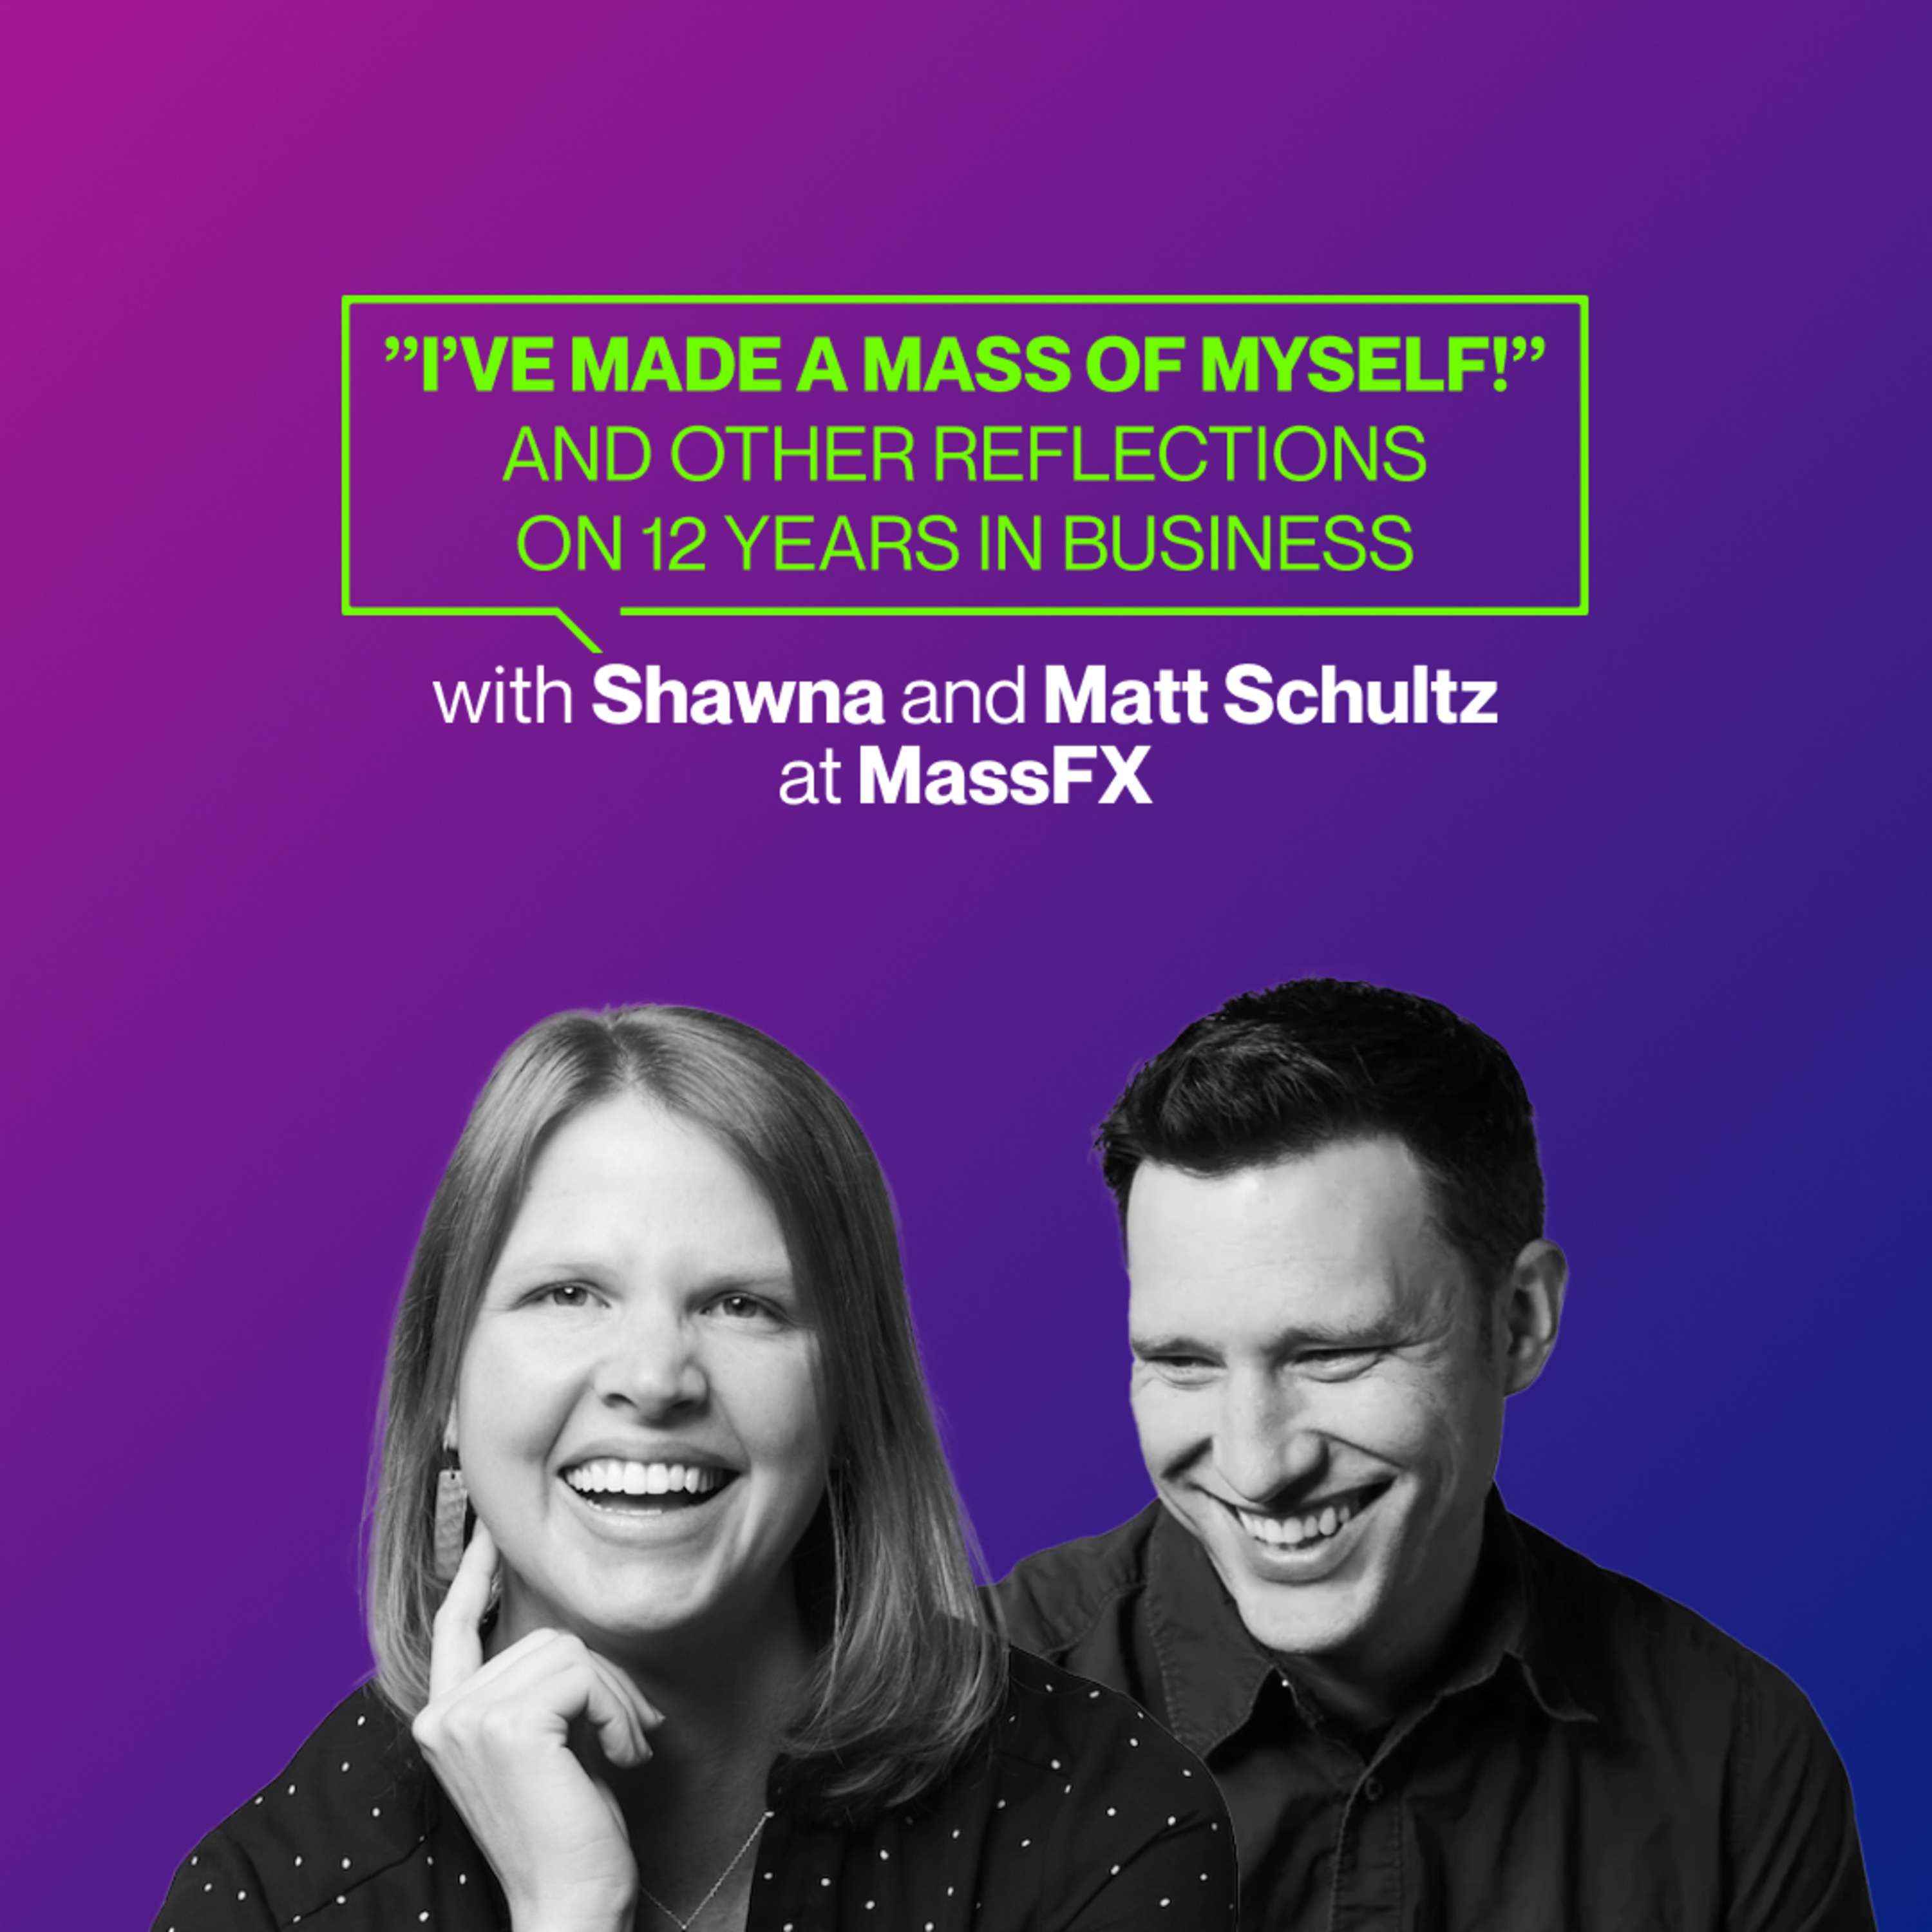 ”I’ve Made a Mass of Myself!” and Other Reflections on 12 Years in Business - Shawna & Matt Schultz